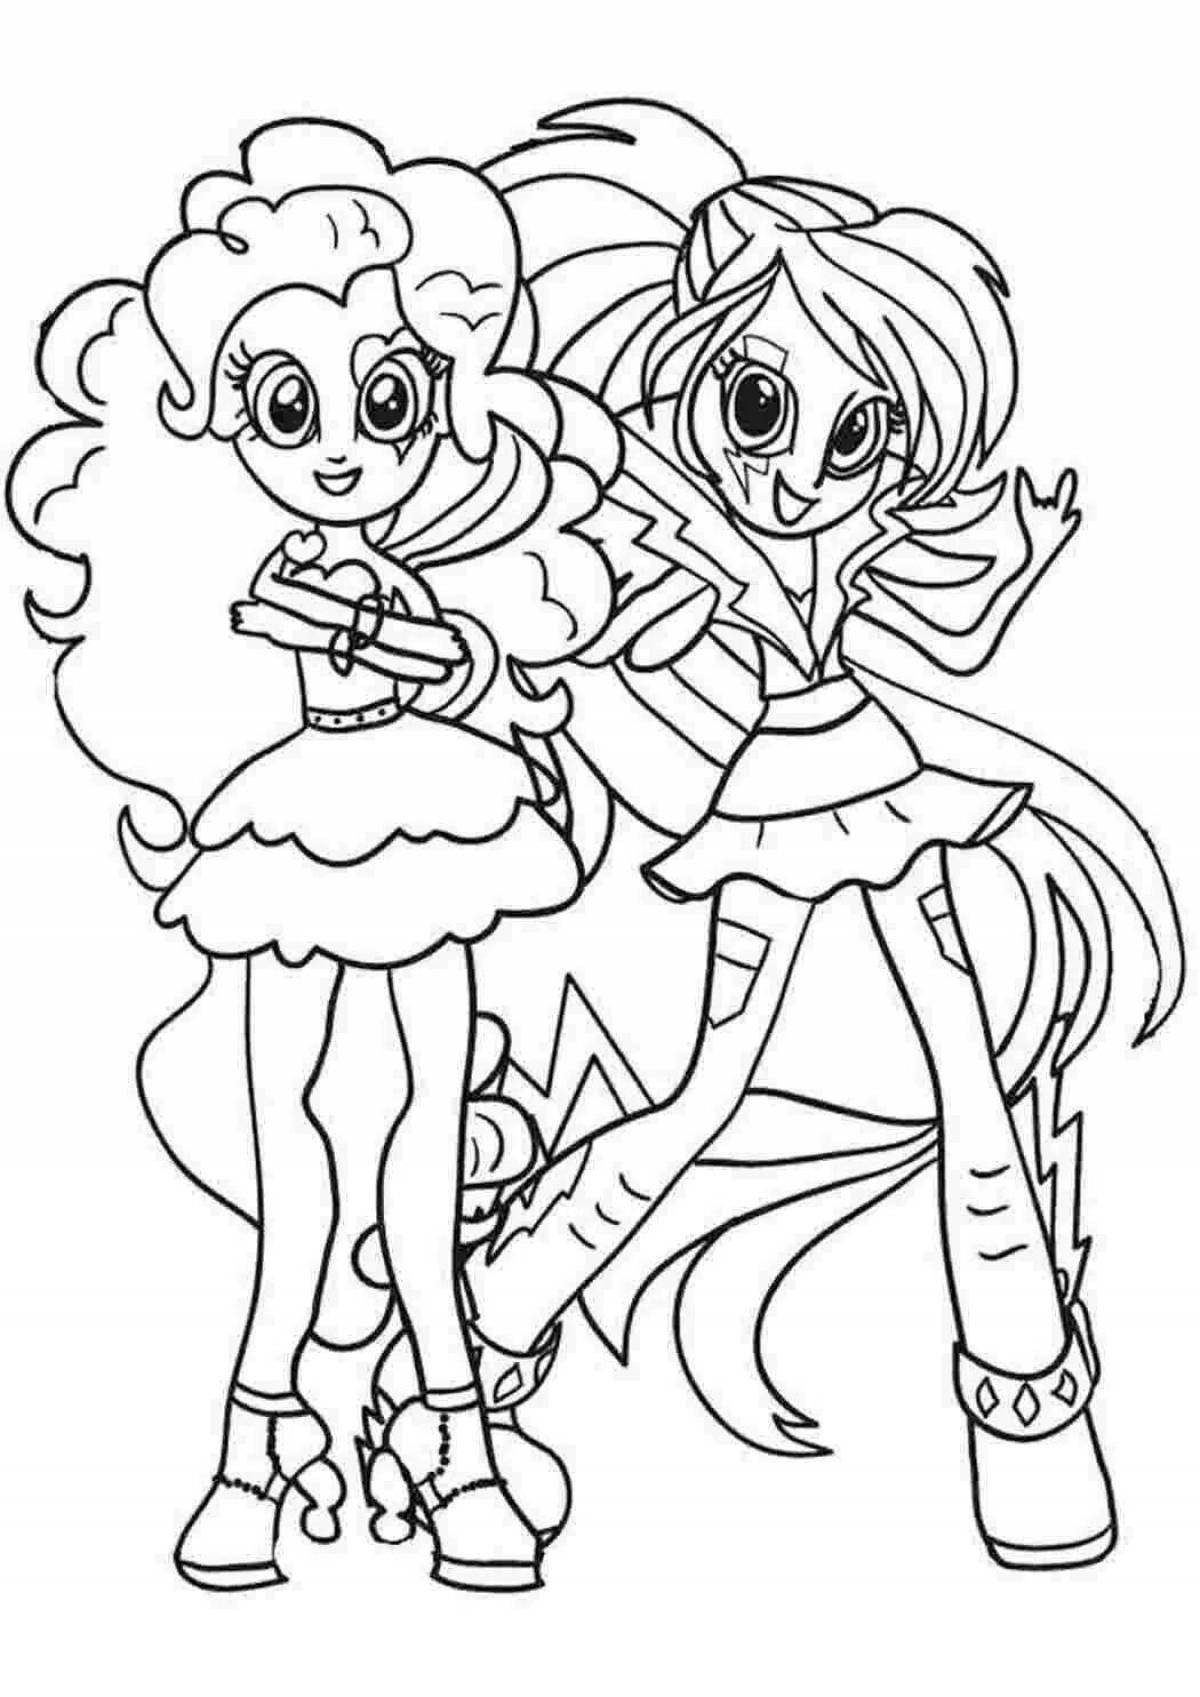 Coloring equestria girls pinkie pie